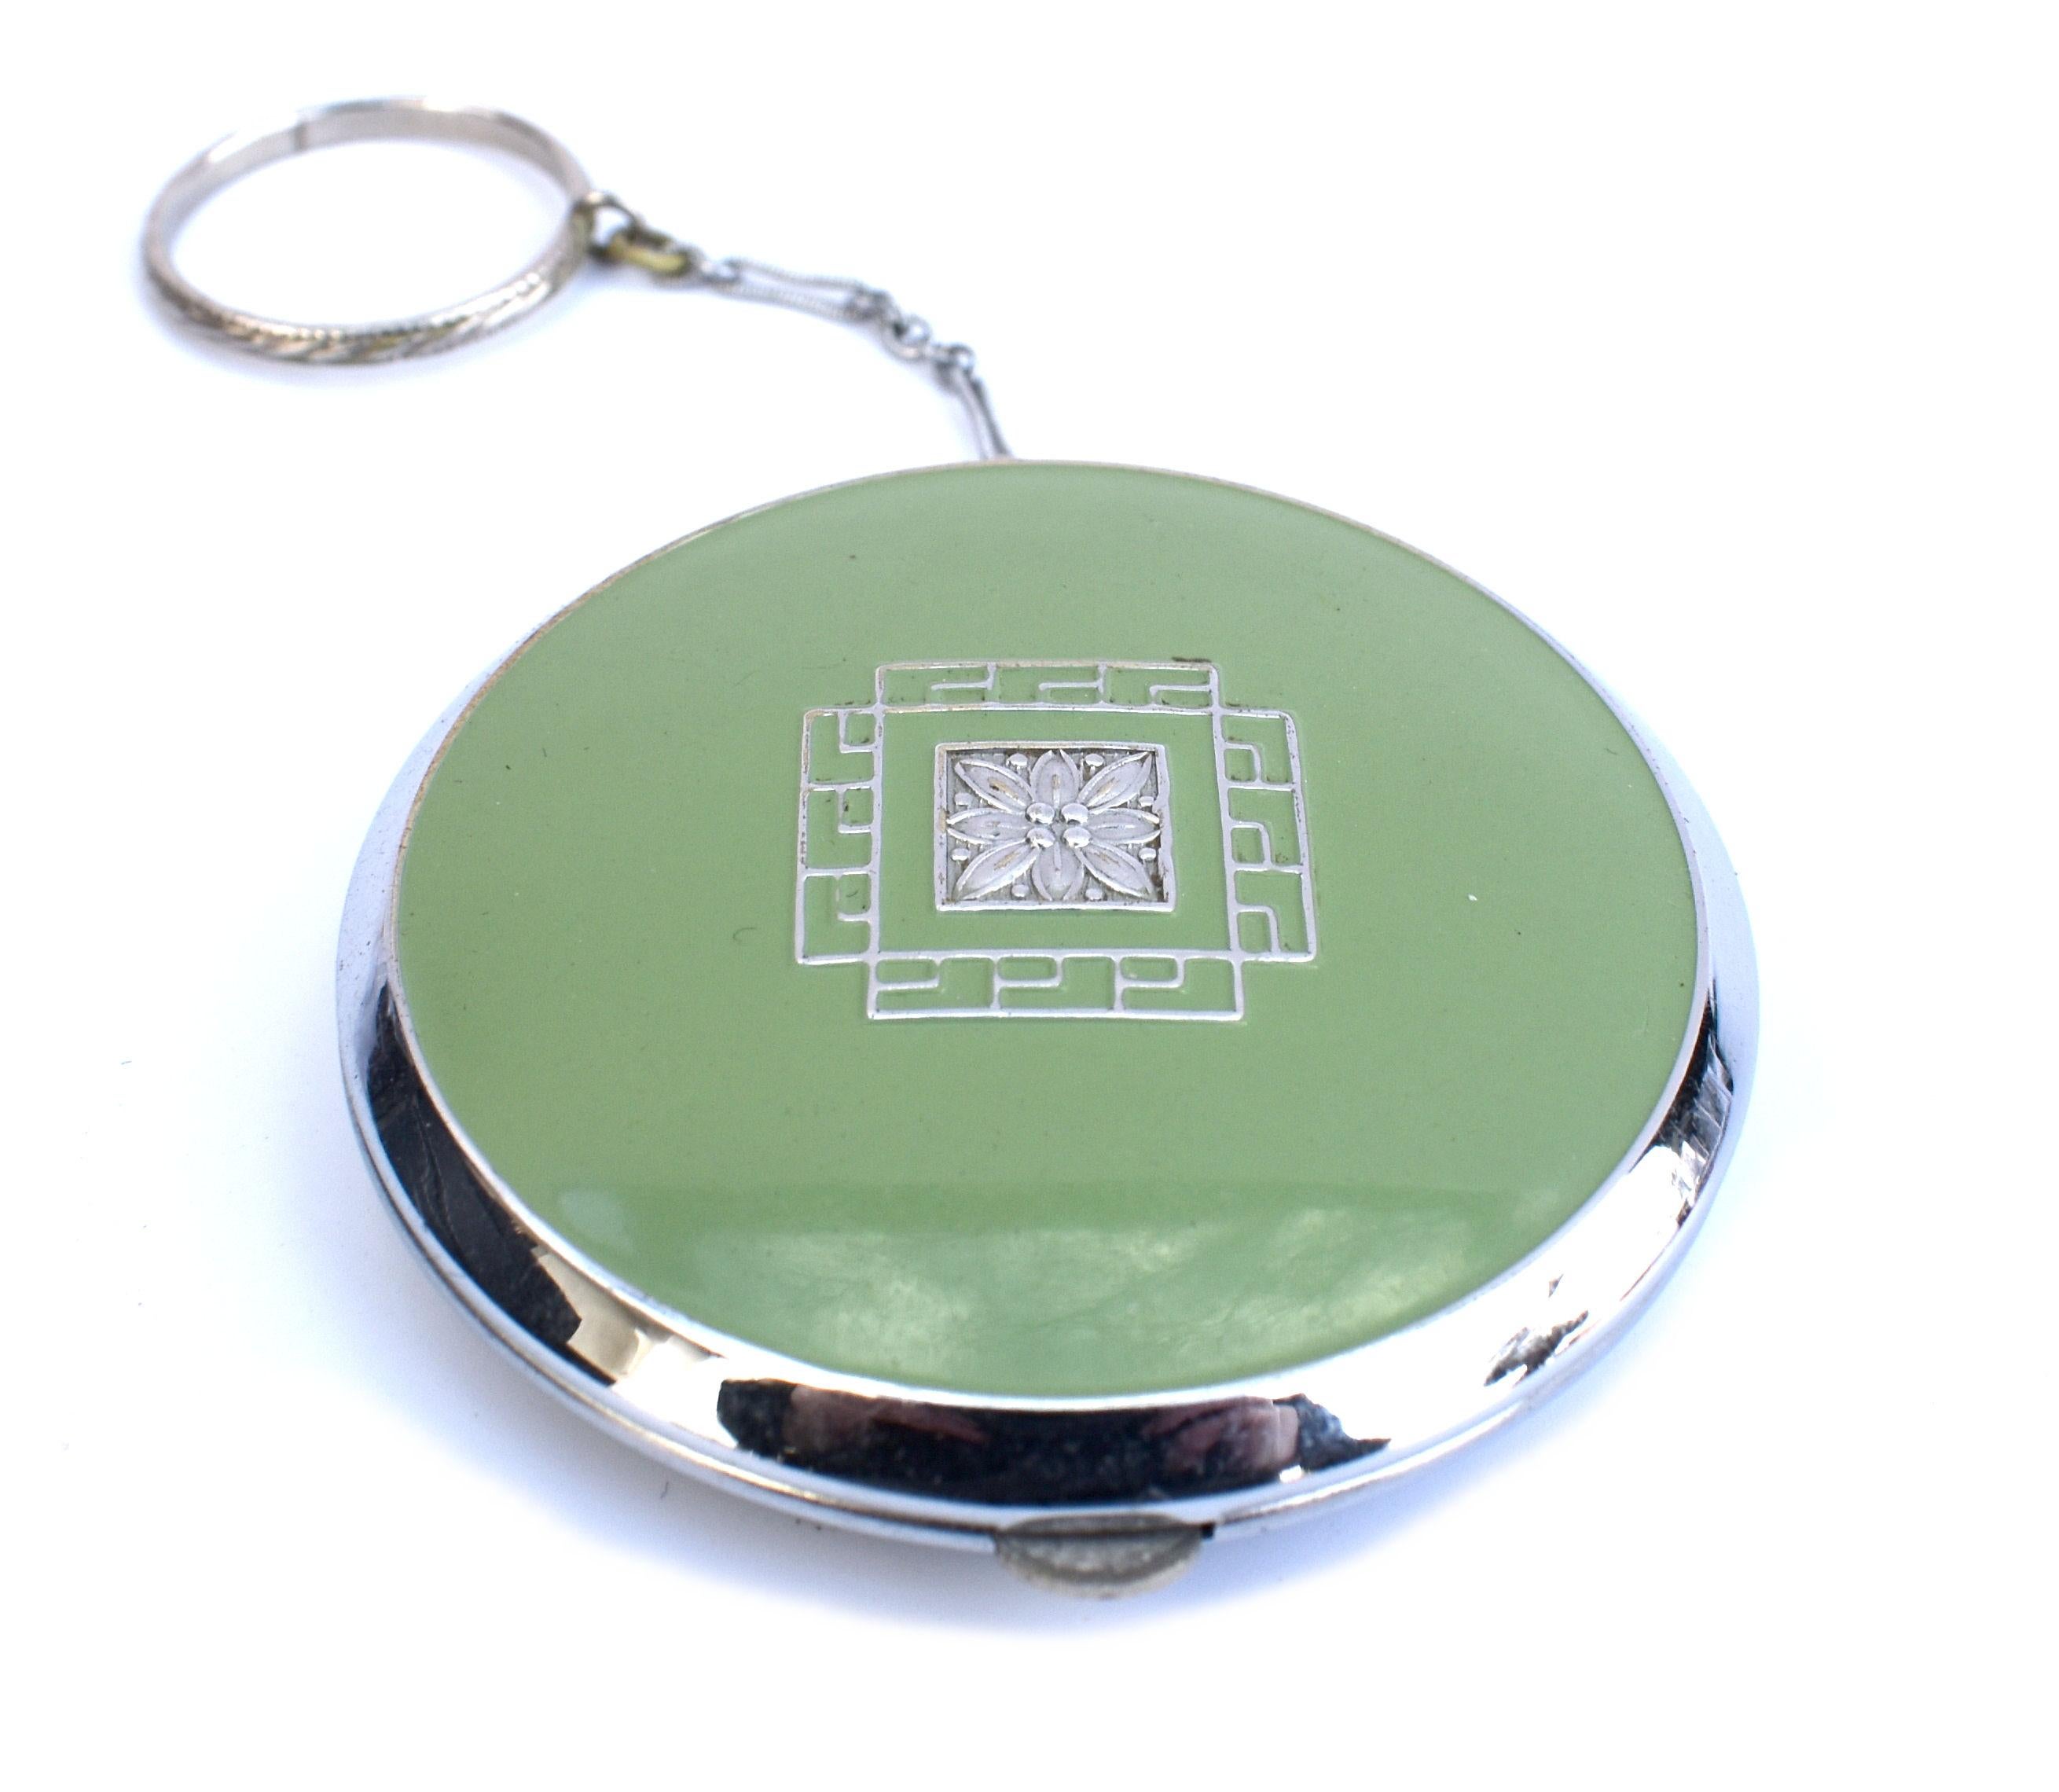 For your consideration is this virtually mint condition Art Deco ladies combination compact dating to 1930's. This is a classic Art Deco compact features powder, rouge and mirror compact and is an absolute delight in every aspect and genuinely has